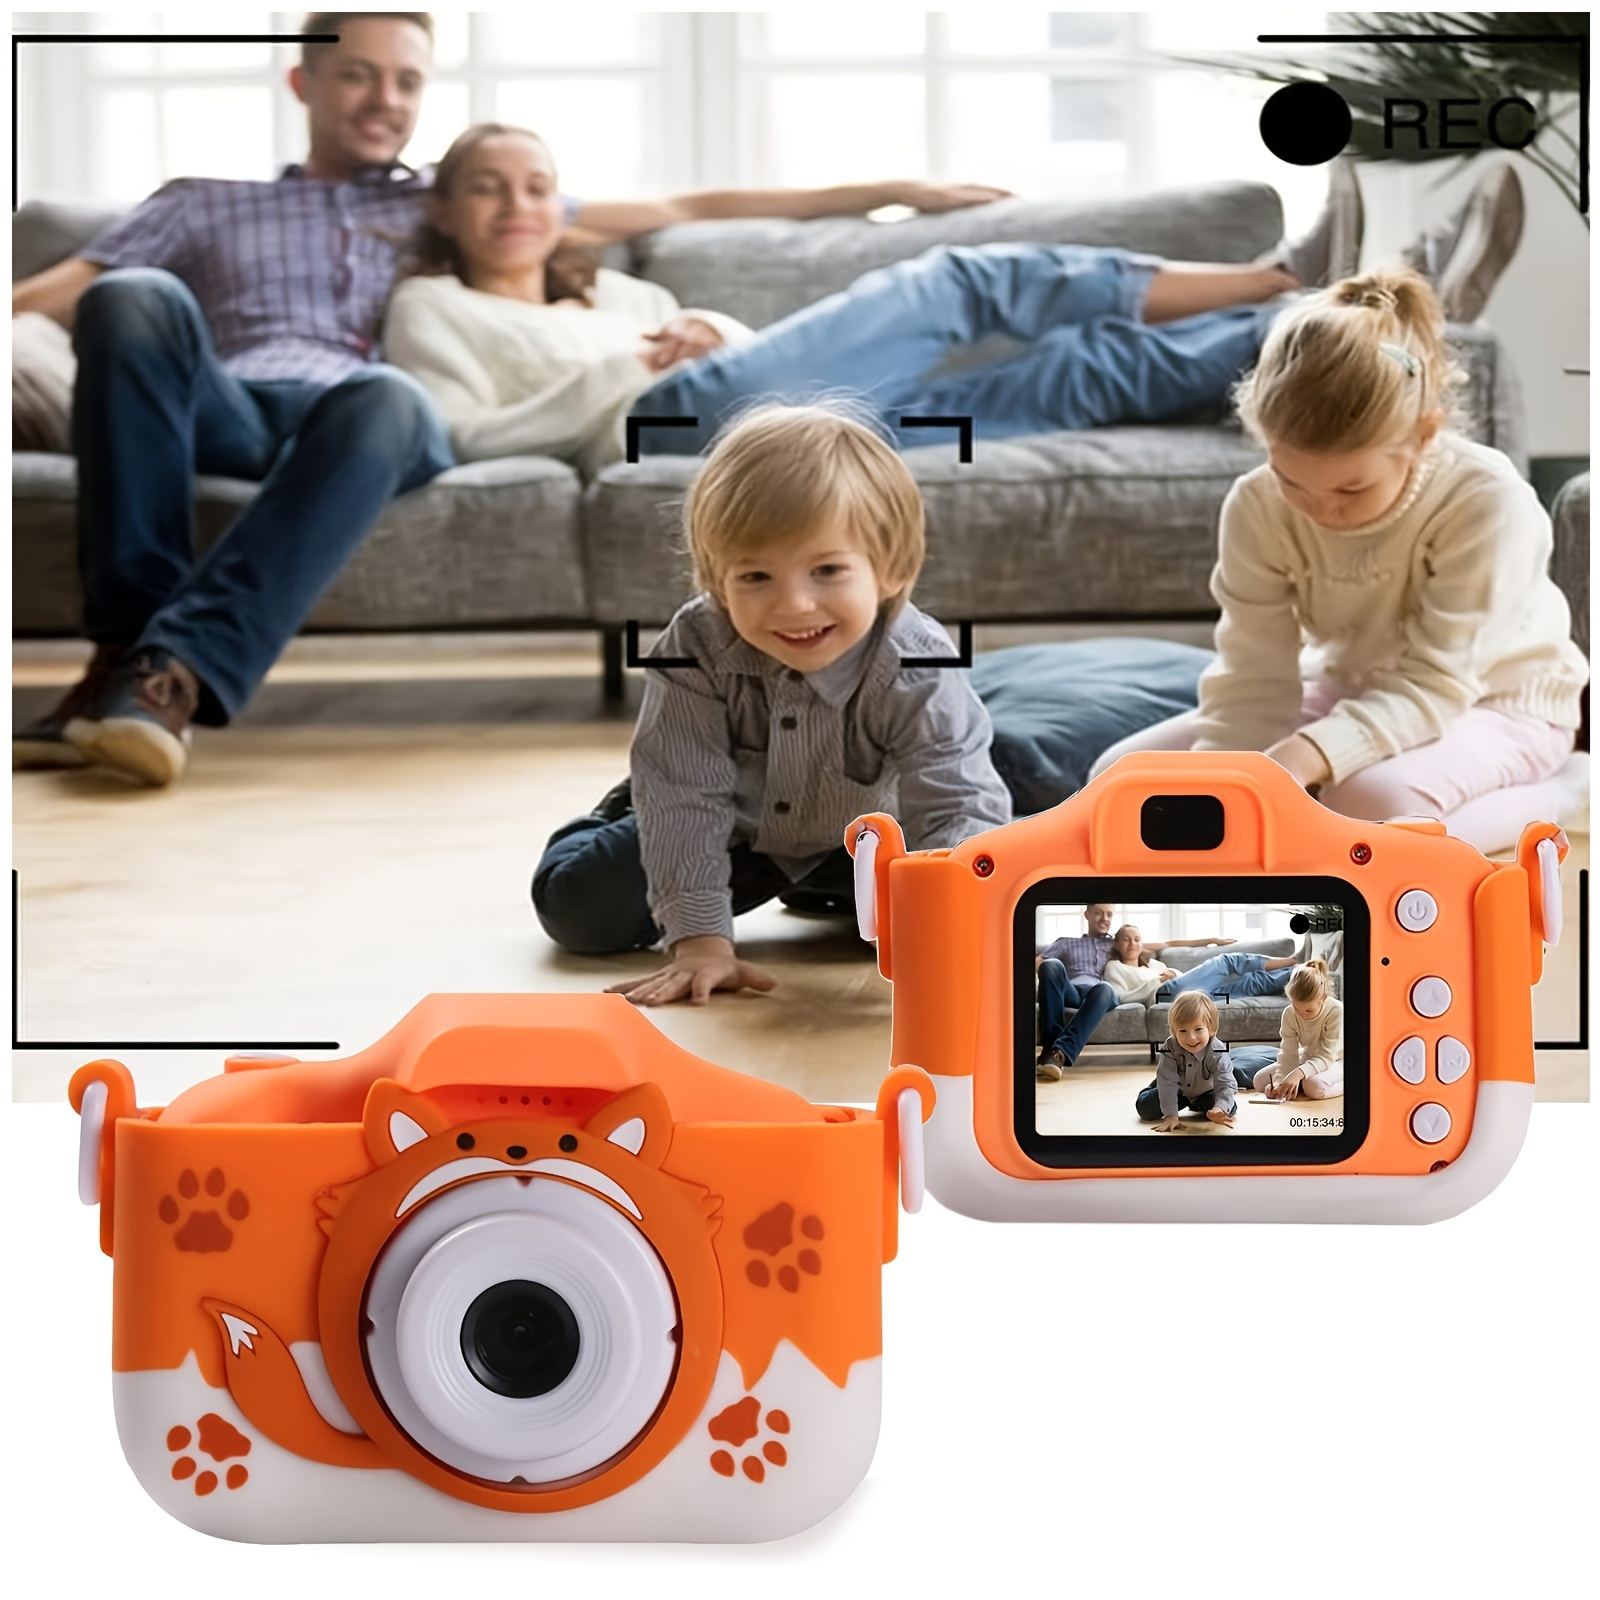  Kids Phone- Smart Baby Phone with Flip Camera Christmas  Birthday Gifts for Girls Boys Ages 3-12, Kids Cell Phone Toddler Learning  Toy, MP3 Music Player, WiFi Messaging, AR Zoo : Toys